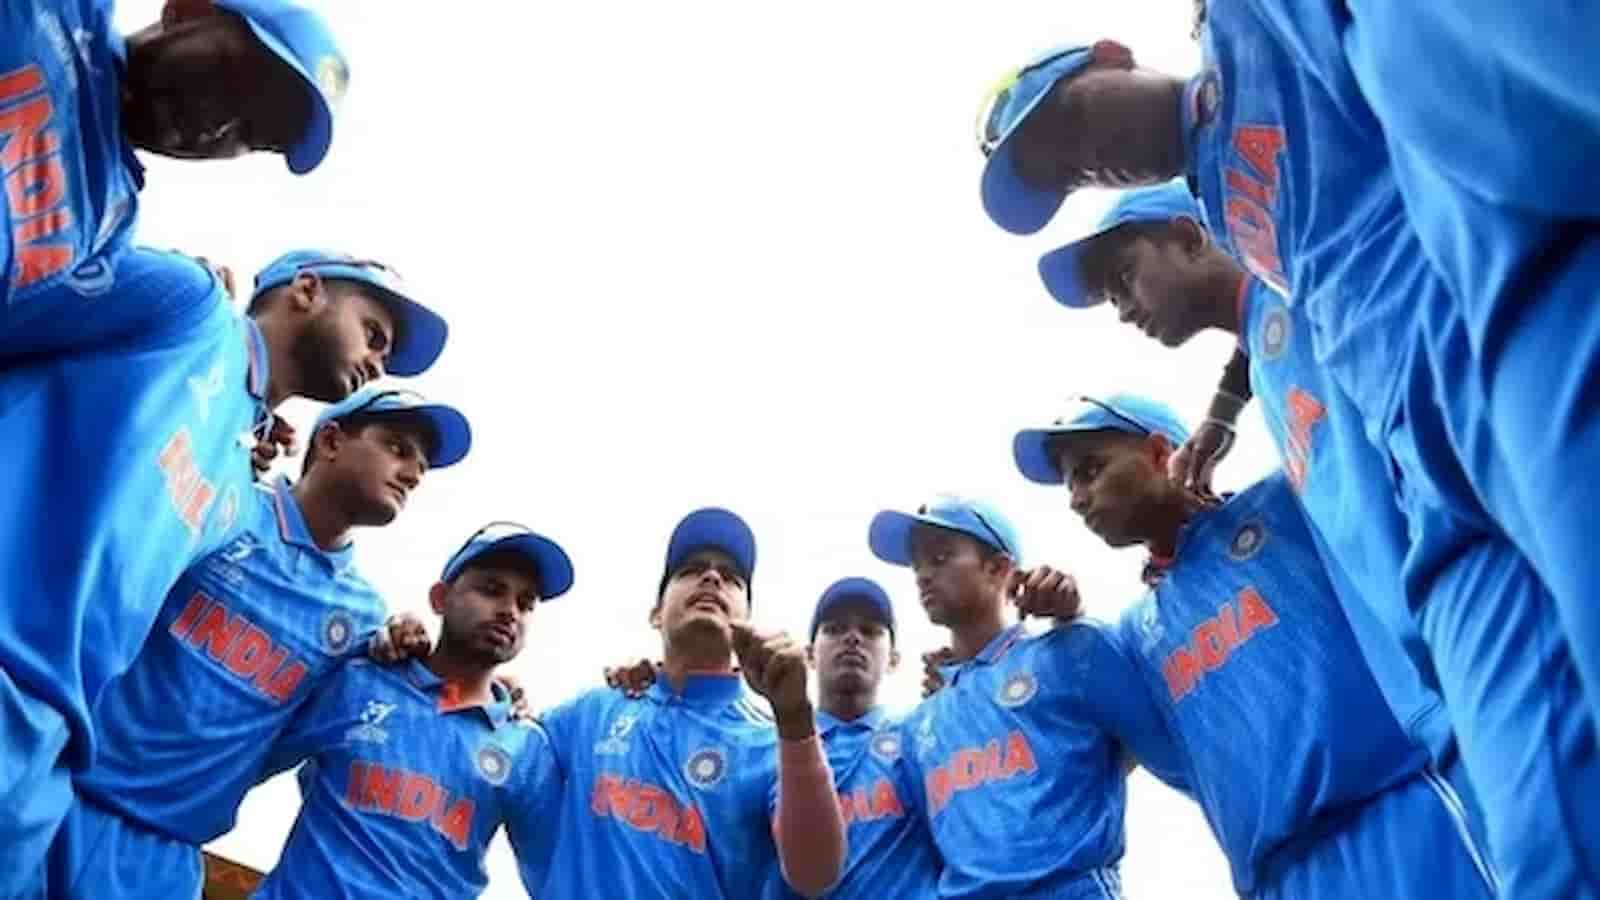 U-19 World Cup semi-final: India win toss, elect to field against South Africa